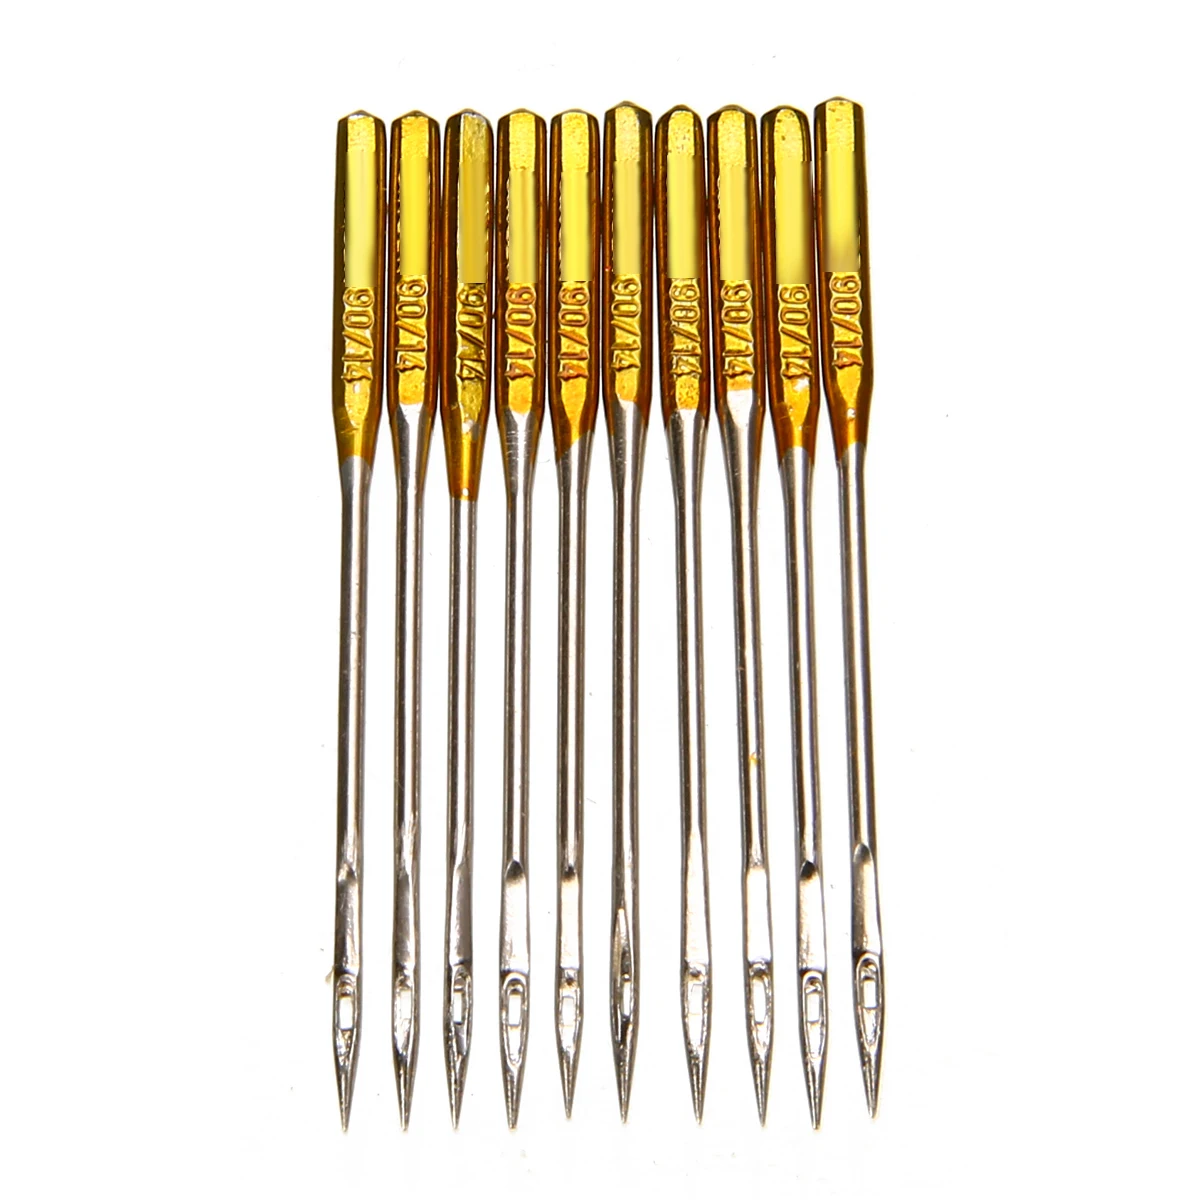 50PCS Home Sewing Machine Needle Regular Ball Point 90/14 No.14 For Singer 